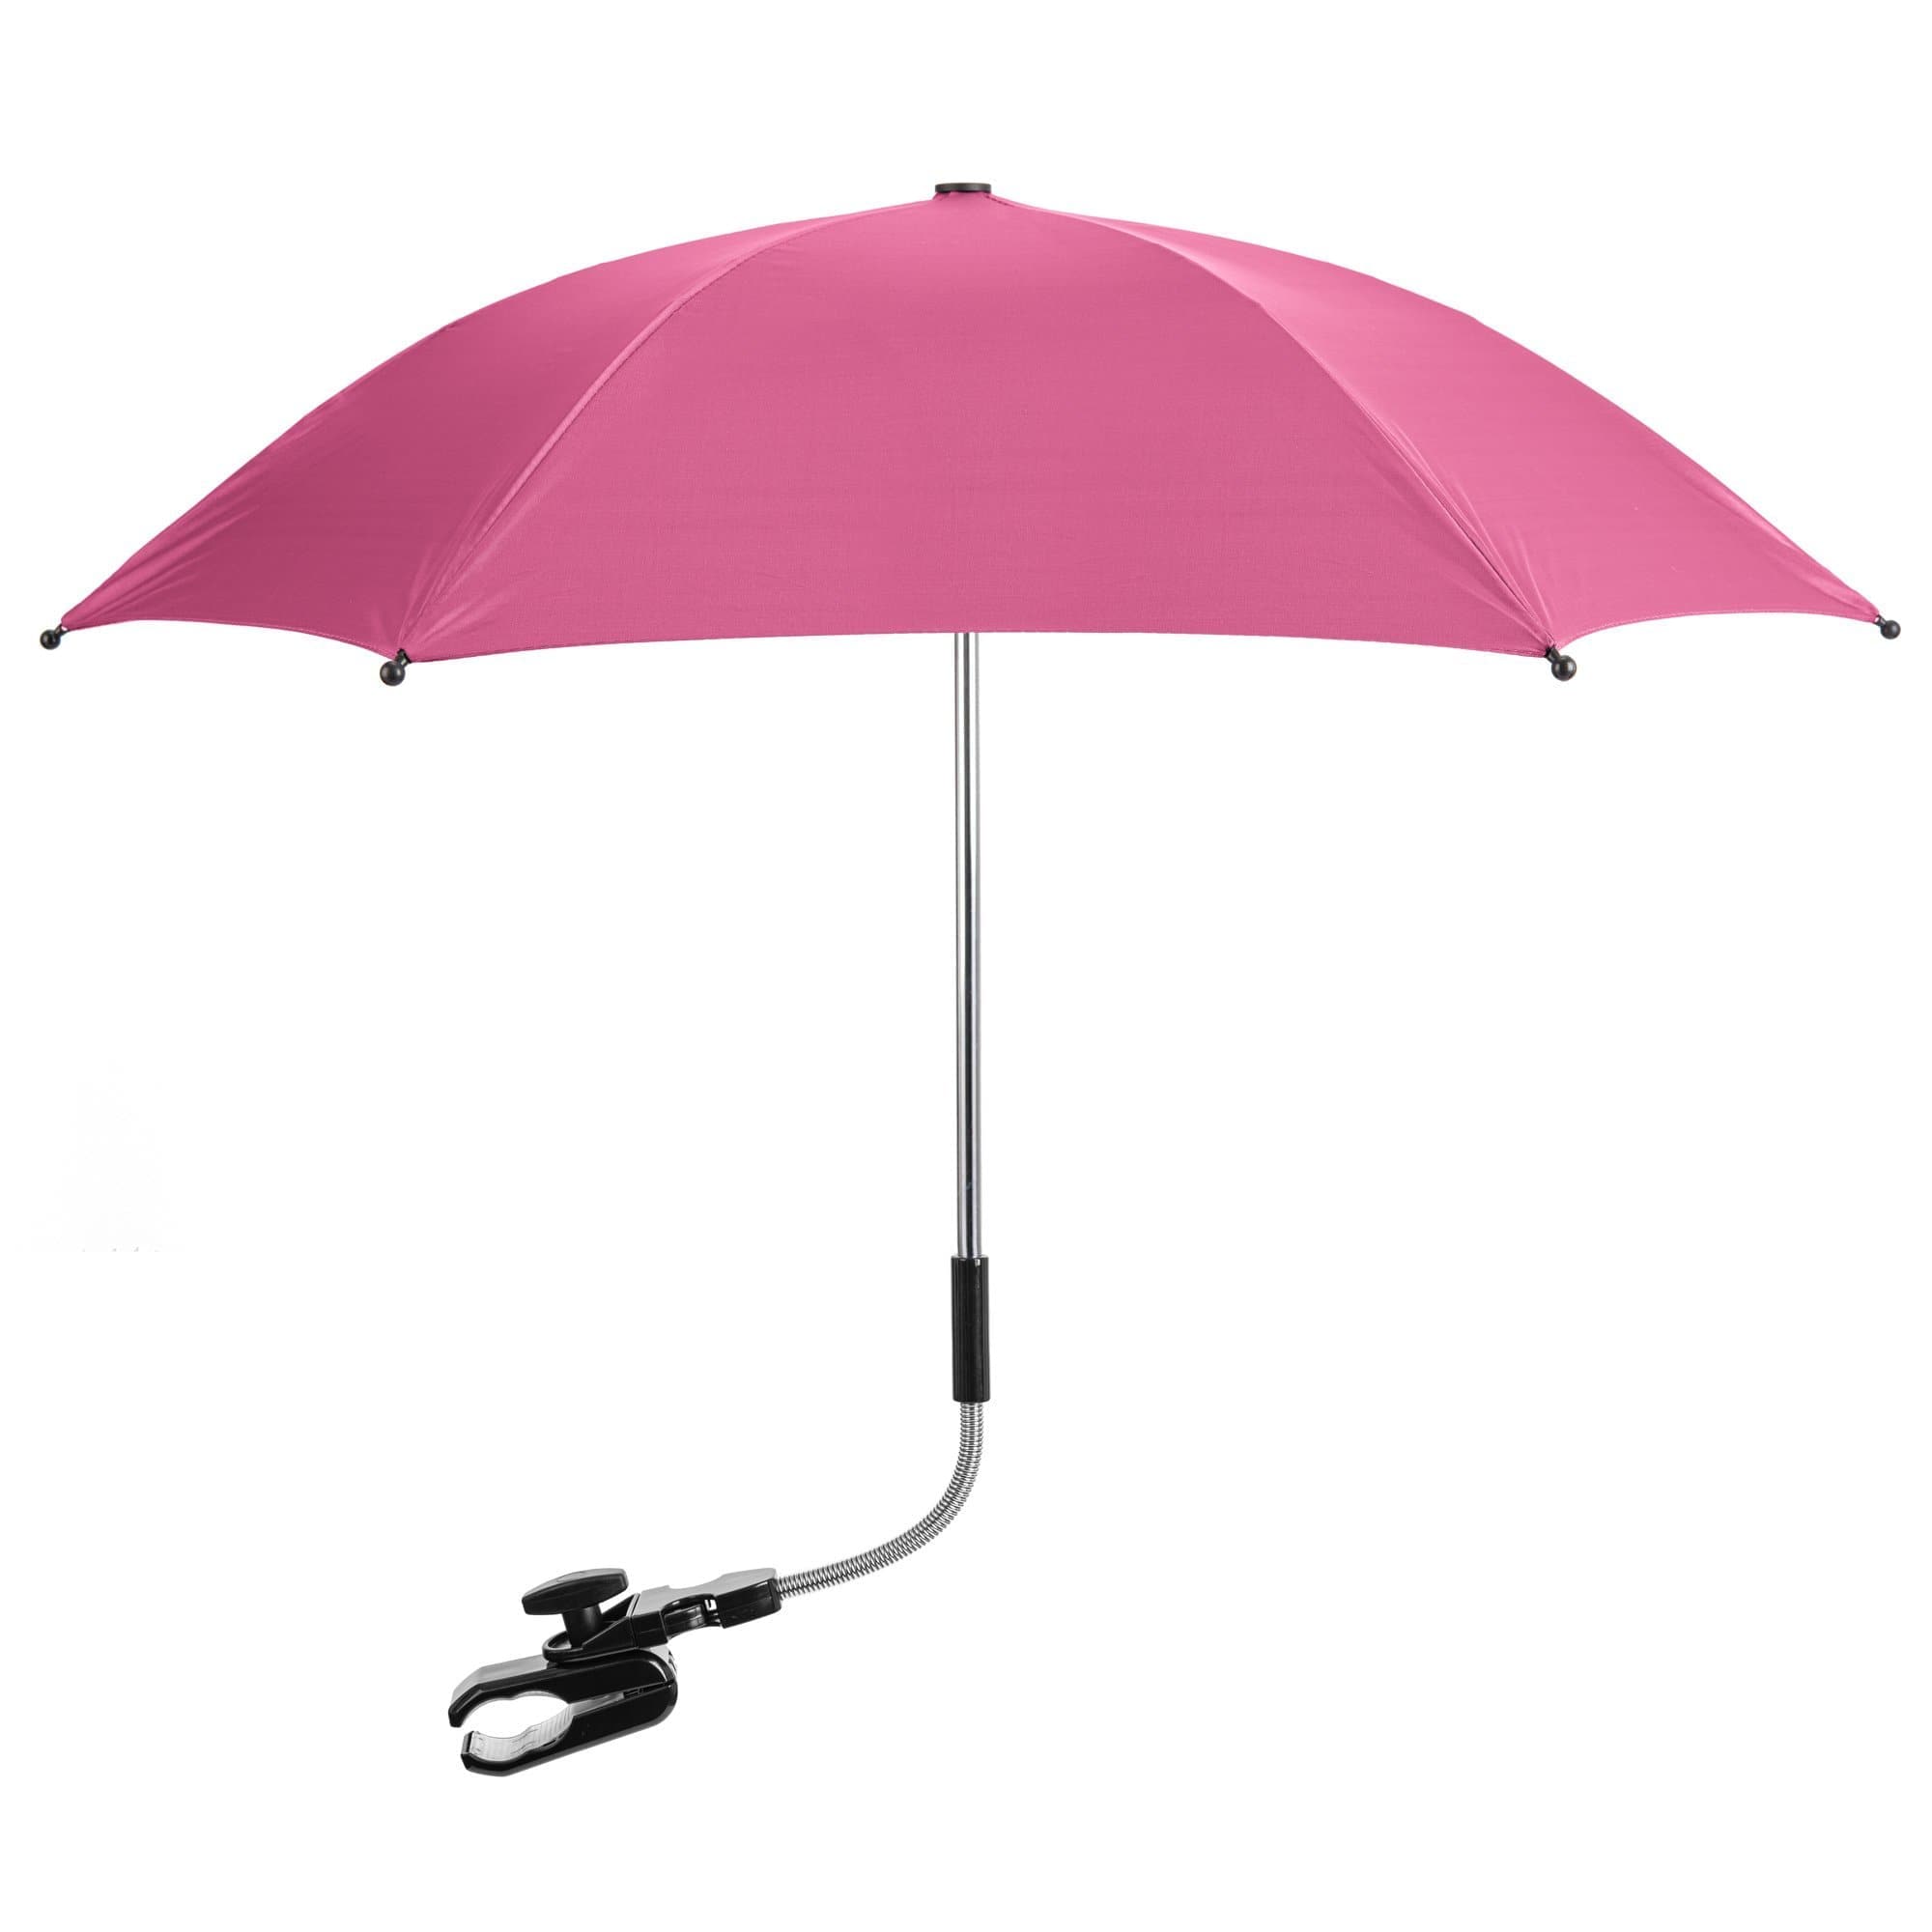 Baby Parasol Compatible With BabySun - Fits All Models - For Your Little One